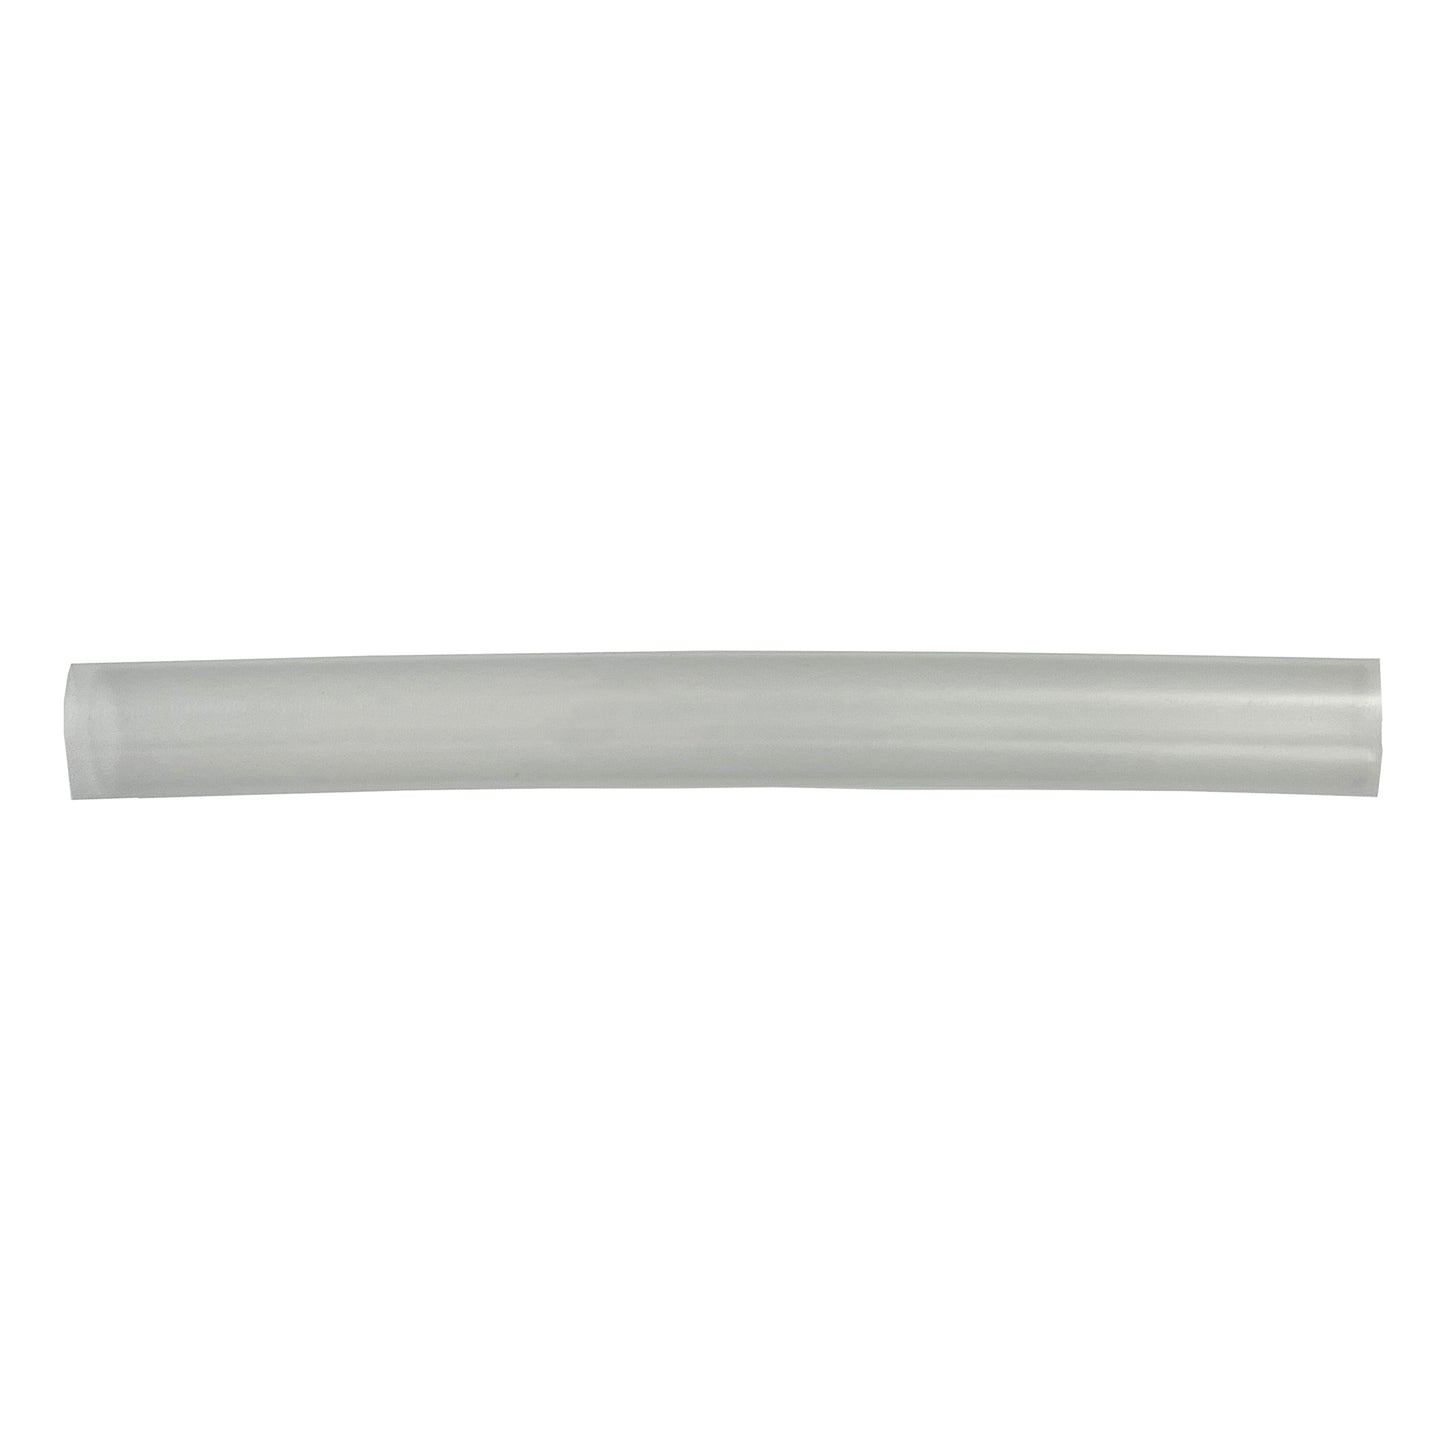 Flexible Thin Single Wall Non-Adhesive Heat Shrink Tubing 2:1 Clear 3/8" ID - 12" Inch 10 Pack